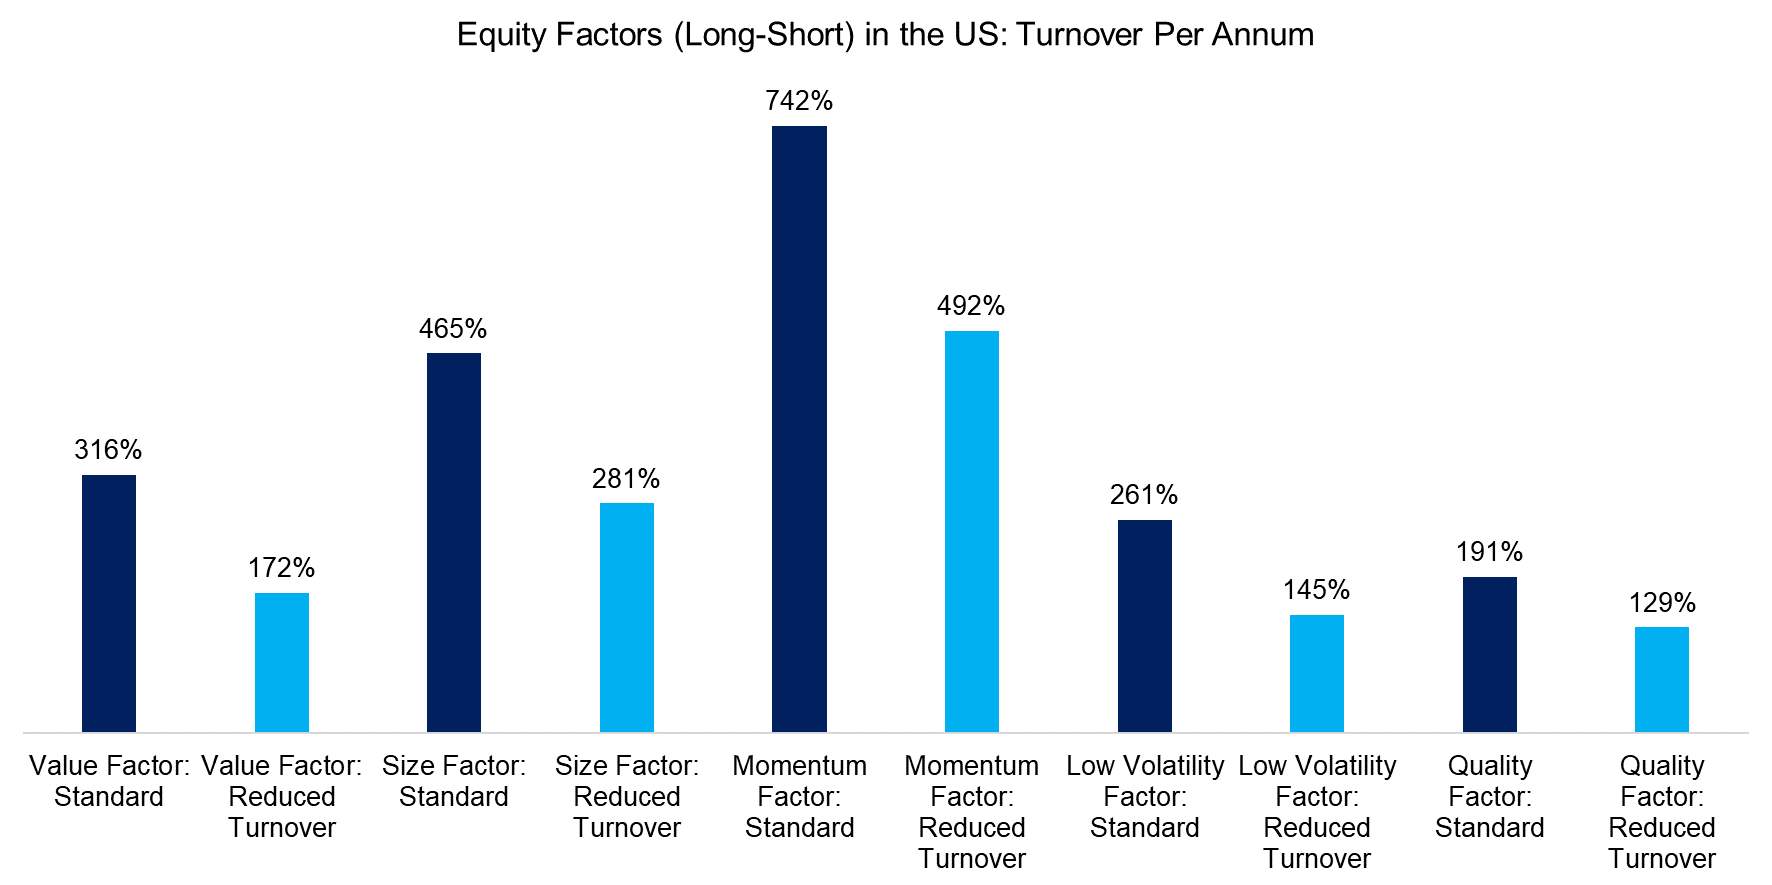 Equity Factors (Long-Short) in the US Turnover Per Annum